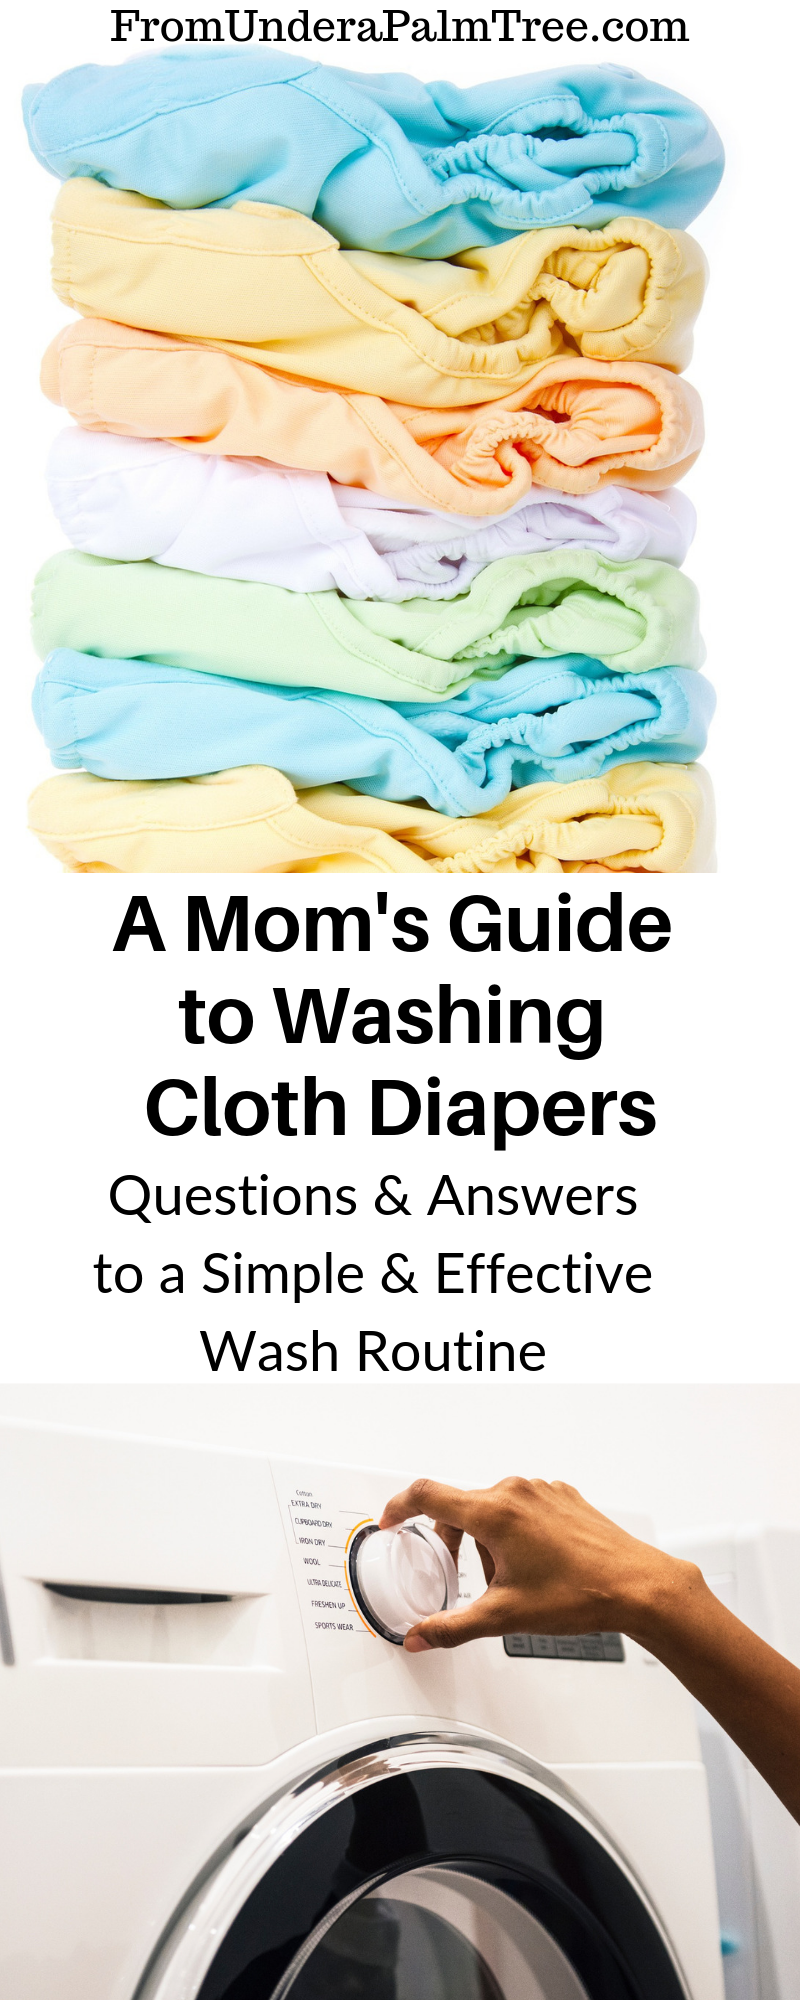 cloth diapers | how to wash cloth diapers | benefits of cloth diapering | earth friendly lifestyle tips | plastic free options | how to save money on baby diapers | mom hacks | baby hacks | how to make cloth diapers last longer | how to strip cloth diapers | 